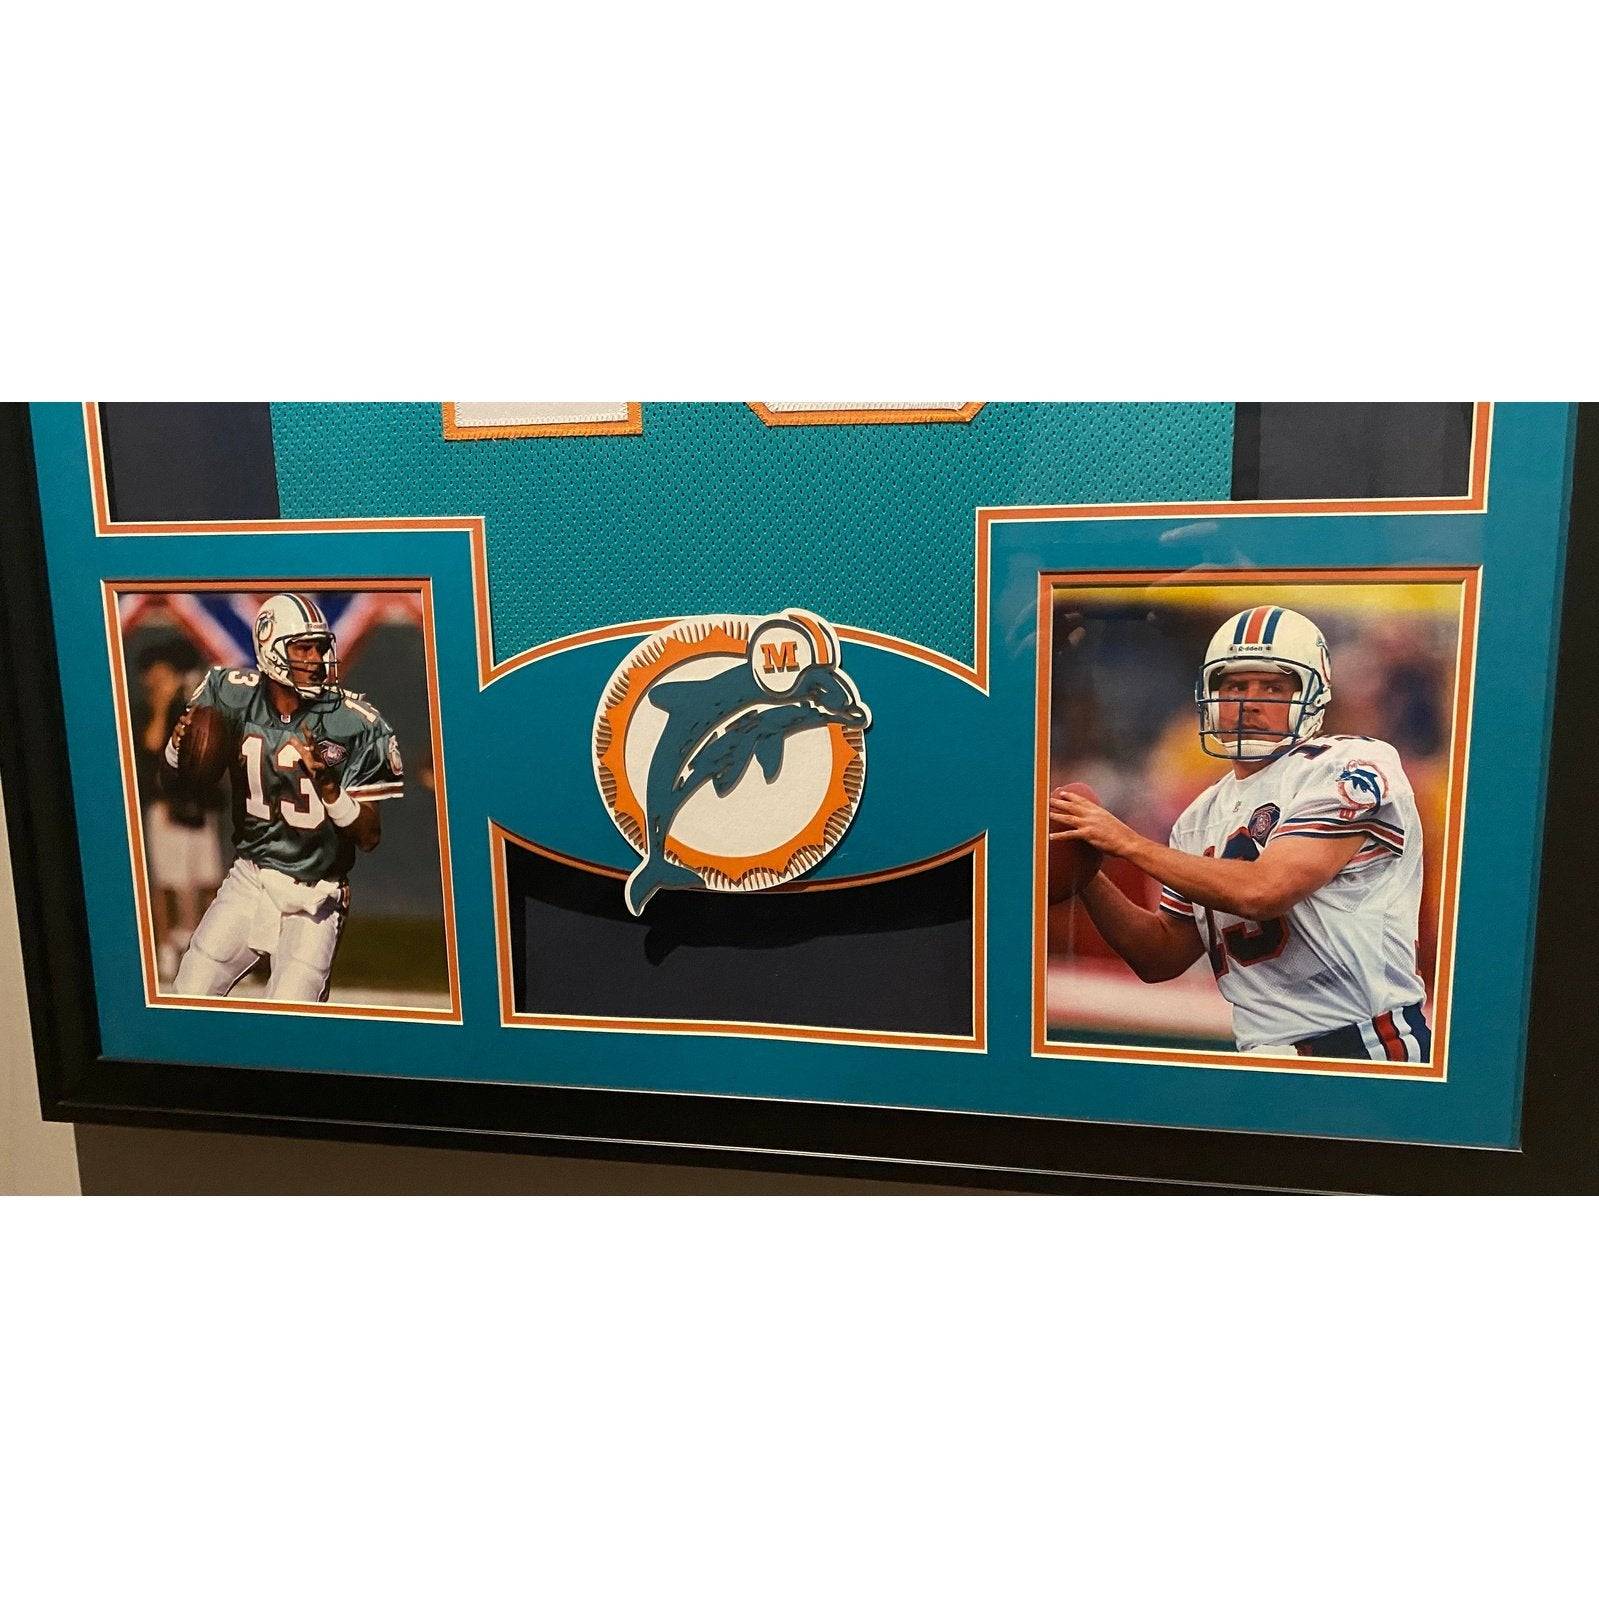 Bob Griese Autographed Signed Framed Miami Dolphins Jersey 